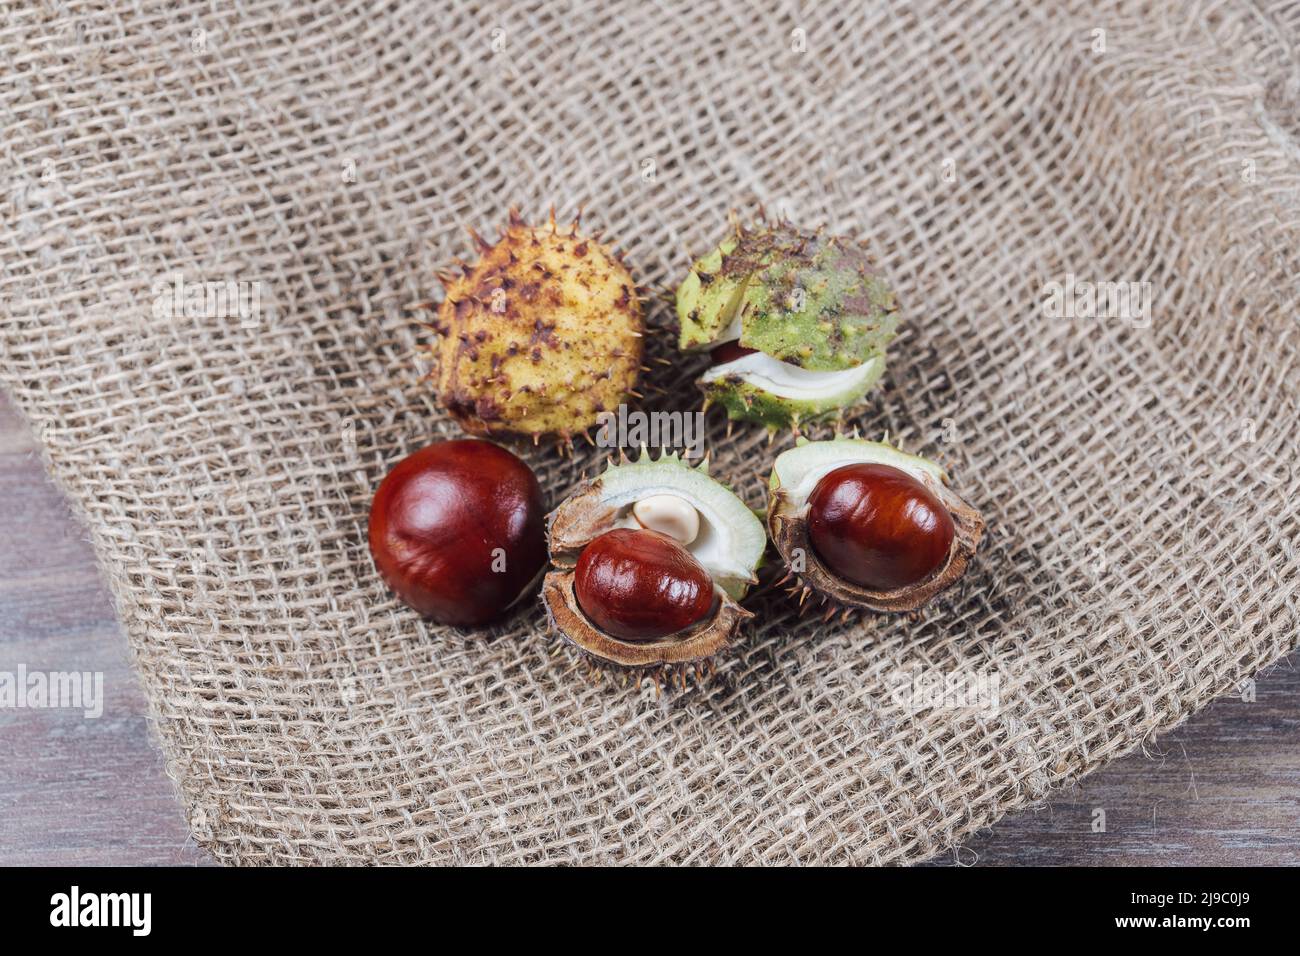 Edible chestnut kernels lie on burlap on a wooden table Stock Photo